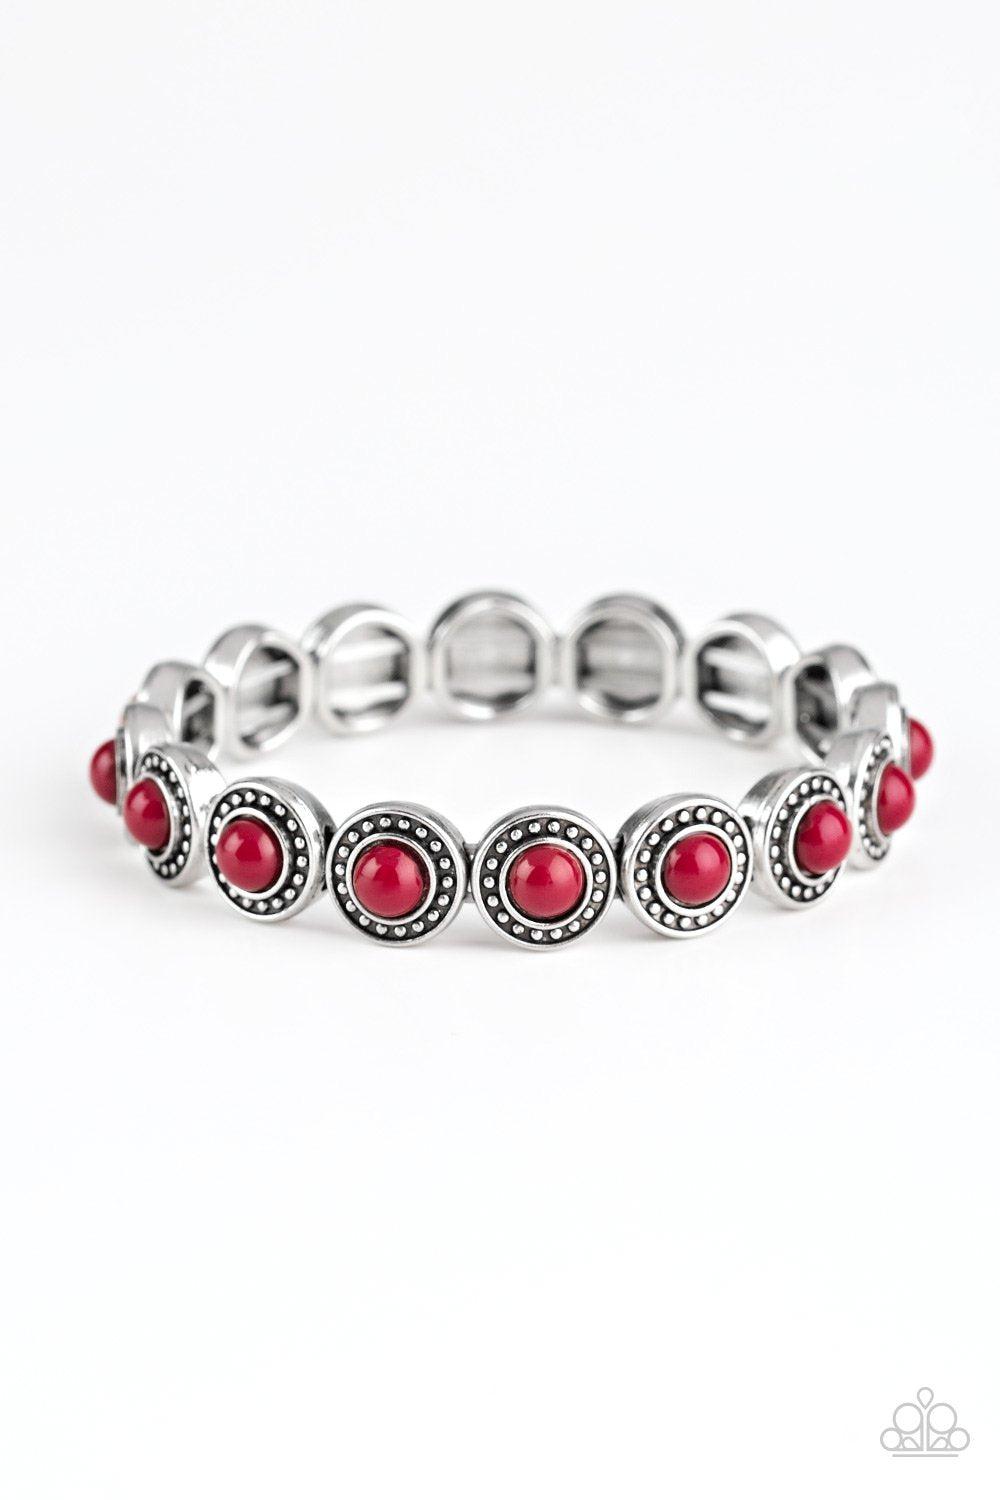 Globetrotter Goals Red and Silver Bracelet - Paparazzi Accessories - lightbox -CarasShop.com - $5 Jewelry by Cara Jewels